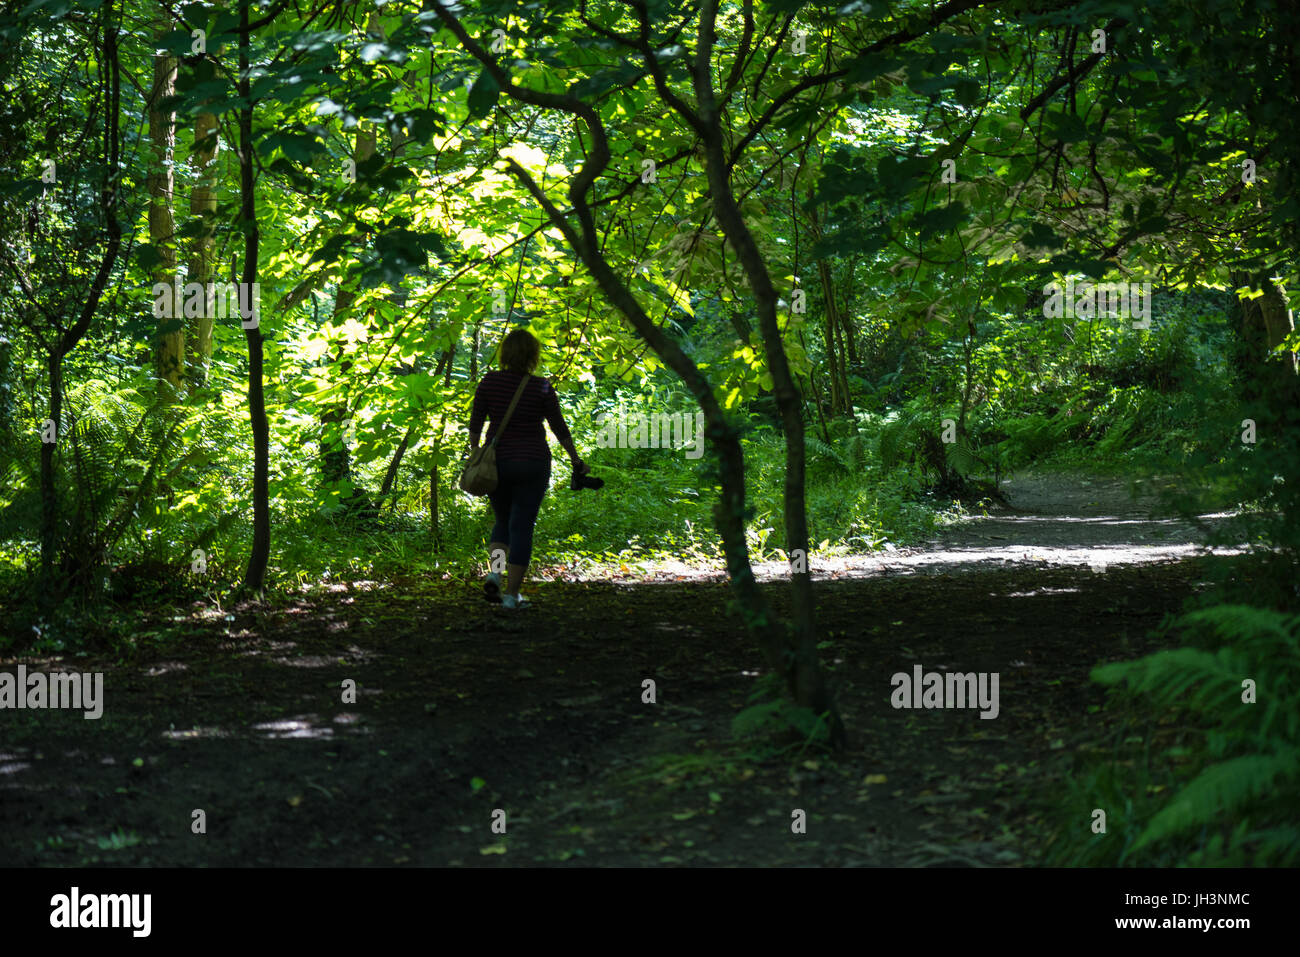 Woman photographer walking in woods at Silverdale Glen, Isle of Man. Stock Photo